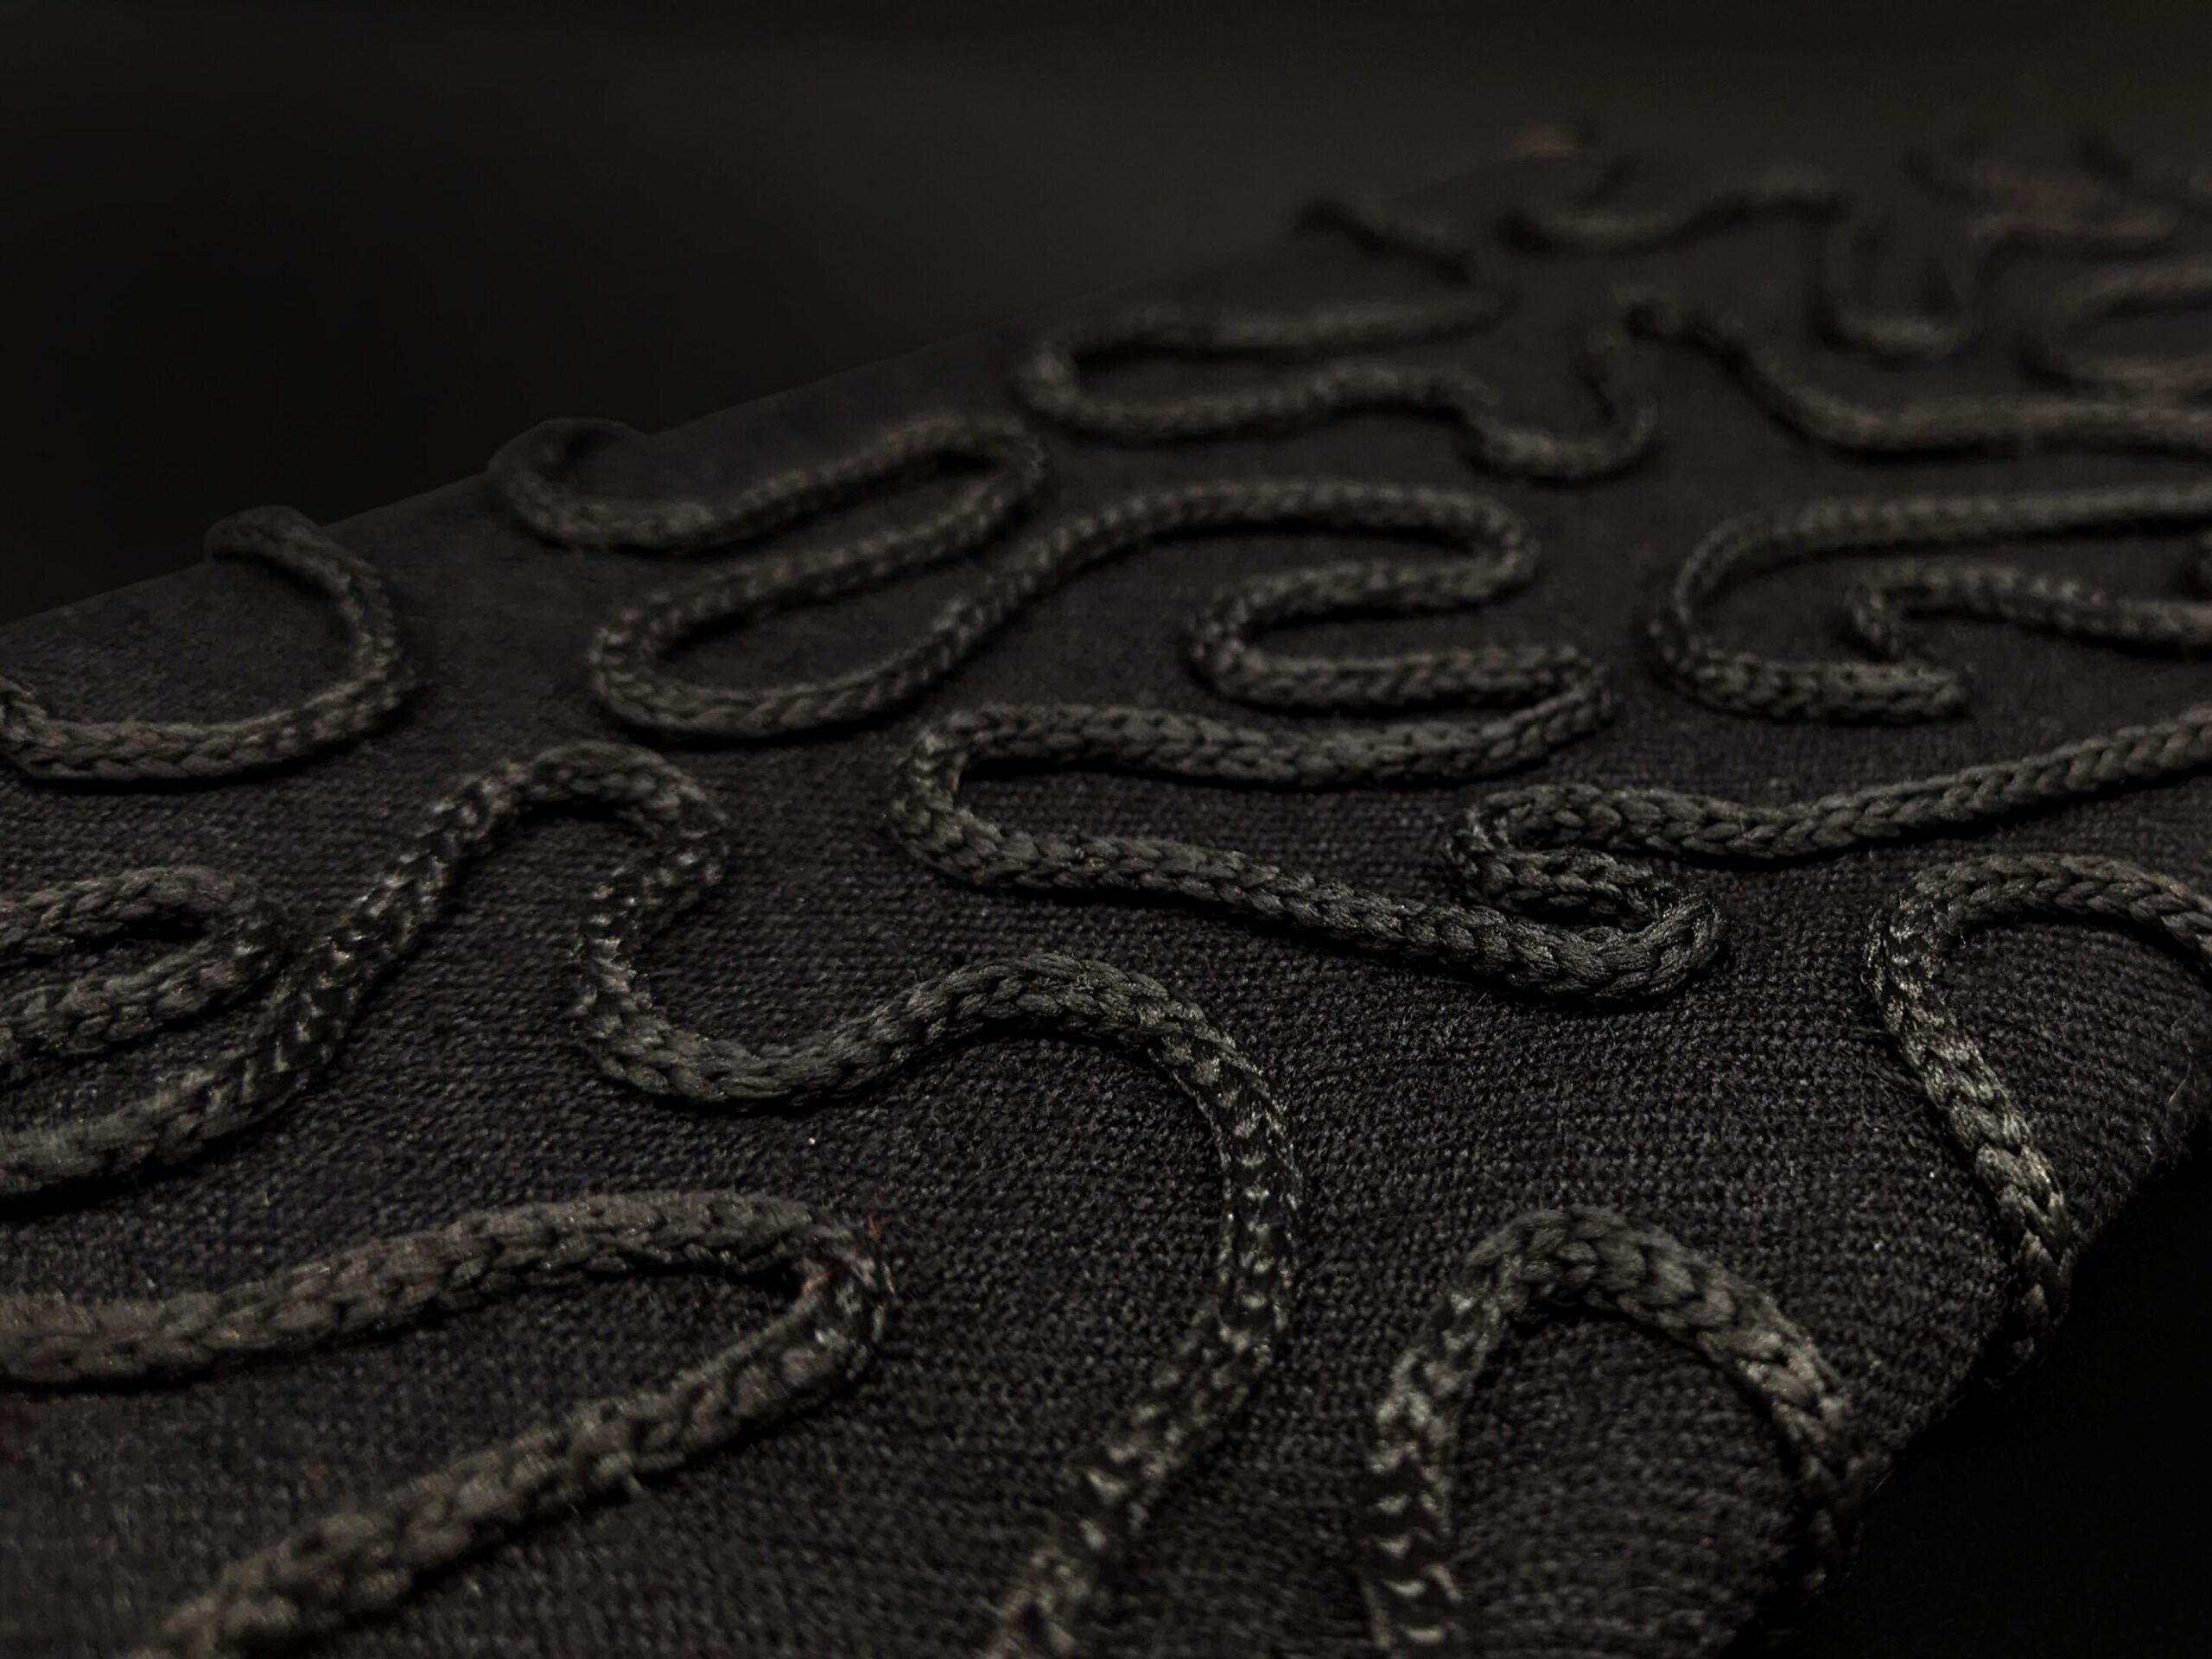 Close up photograph of black couched cord onto black material.